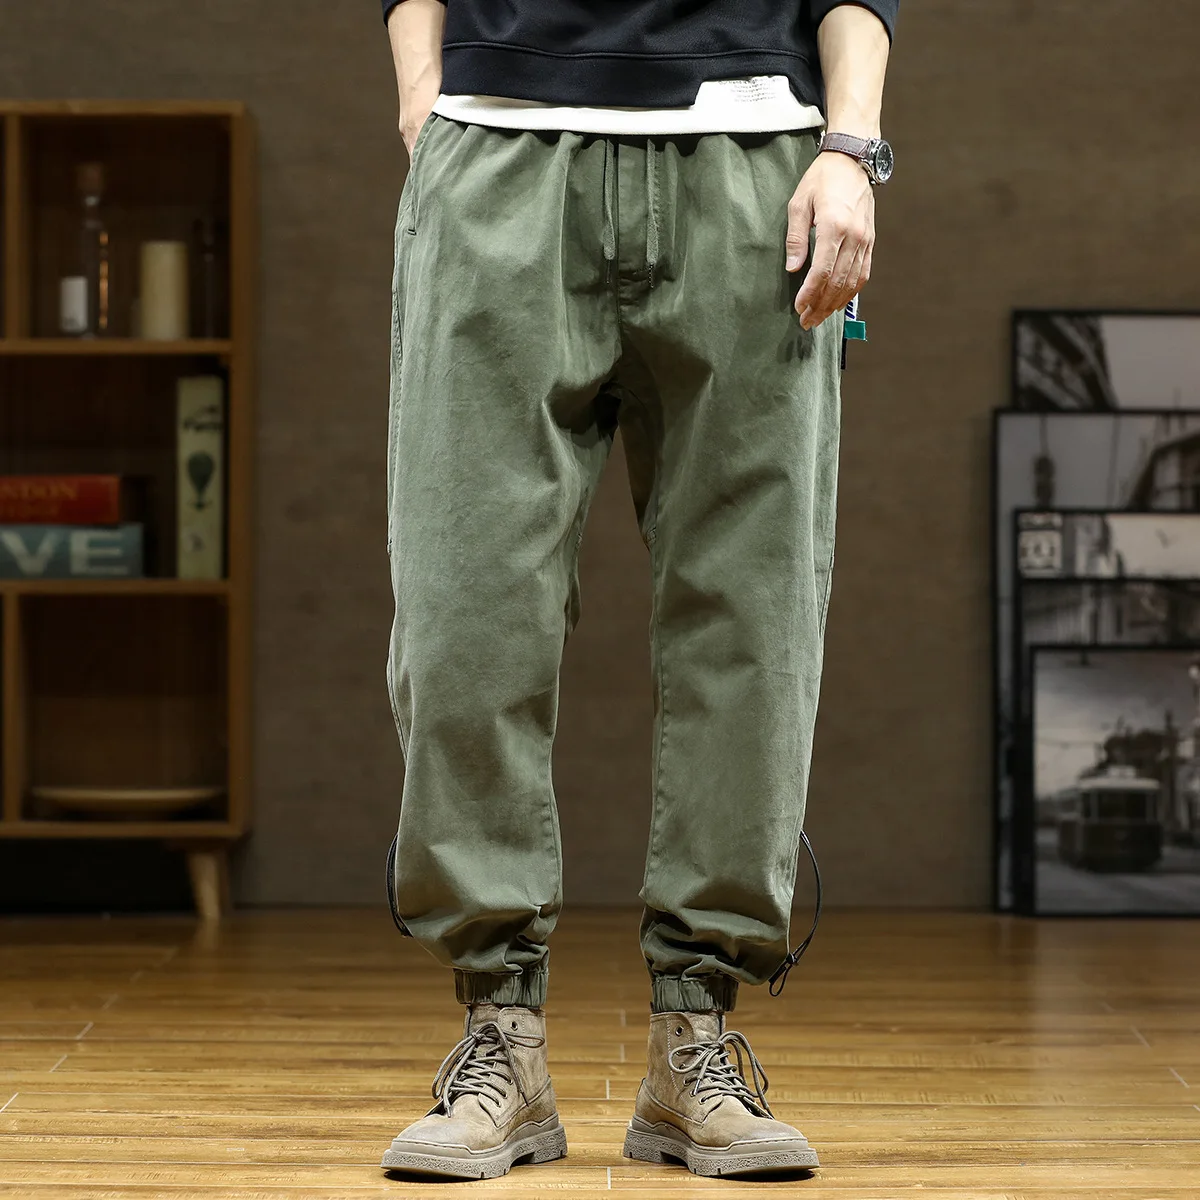 Elmsk Spring and Autumn Military Green Pants for Men's Japanese Loose Large Size Workwear Pants with Elastic Waist and Elastic L